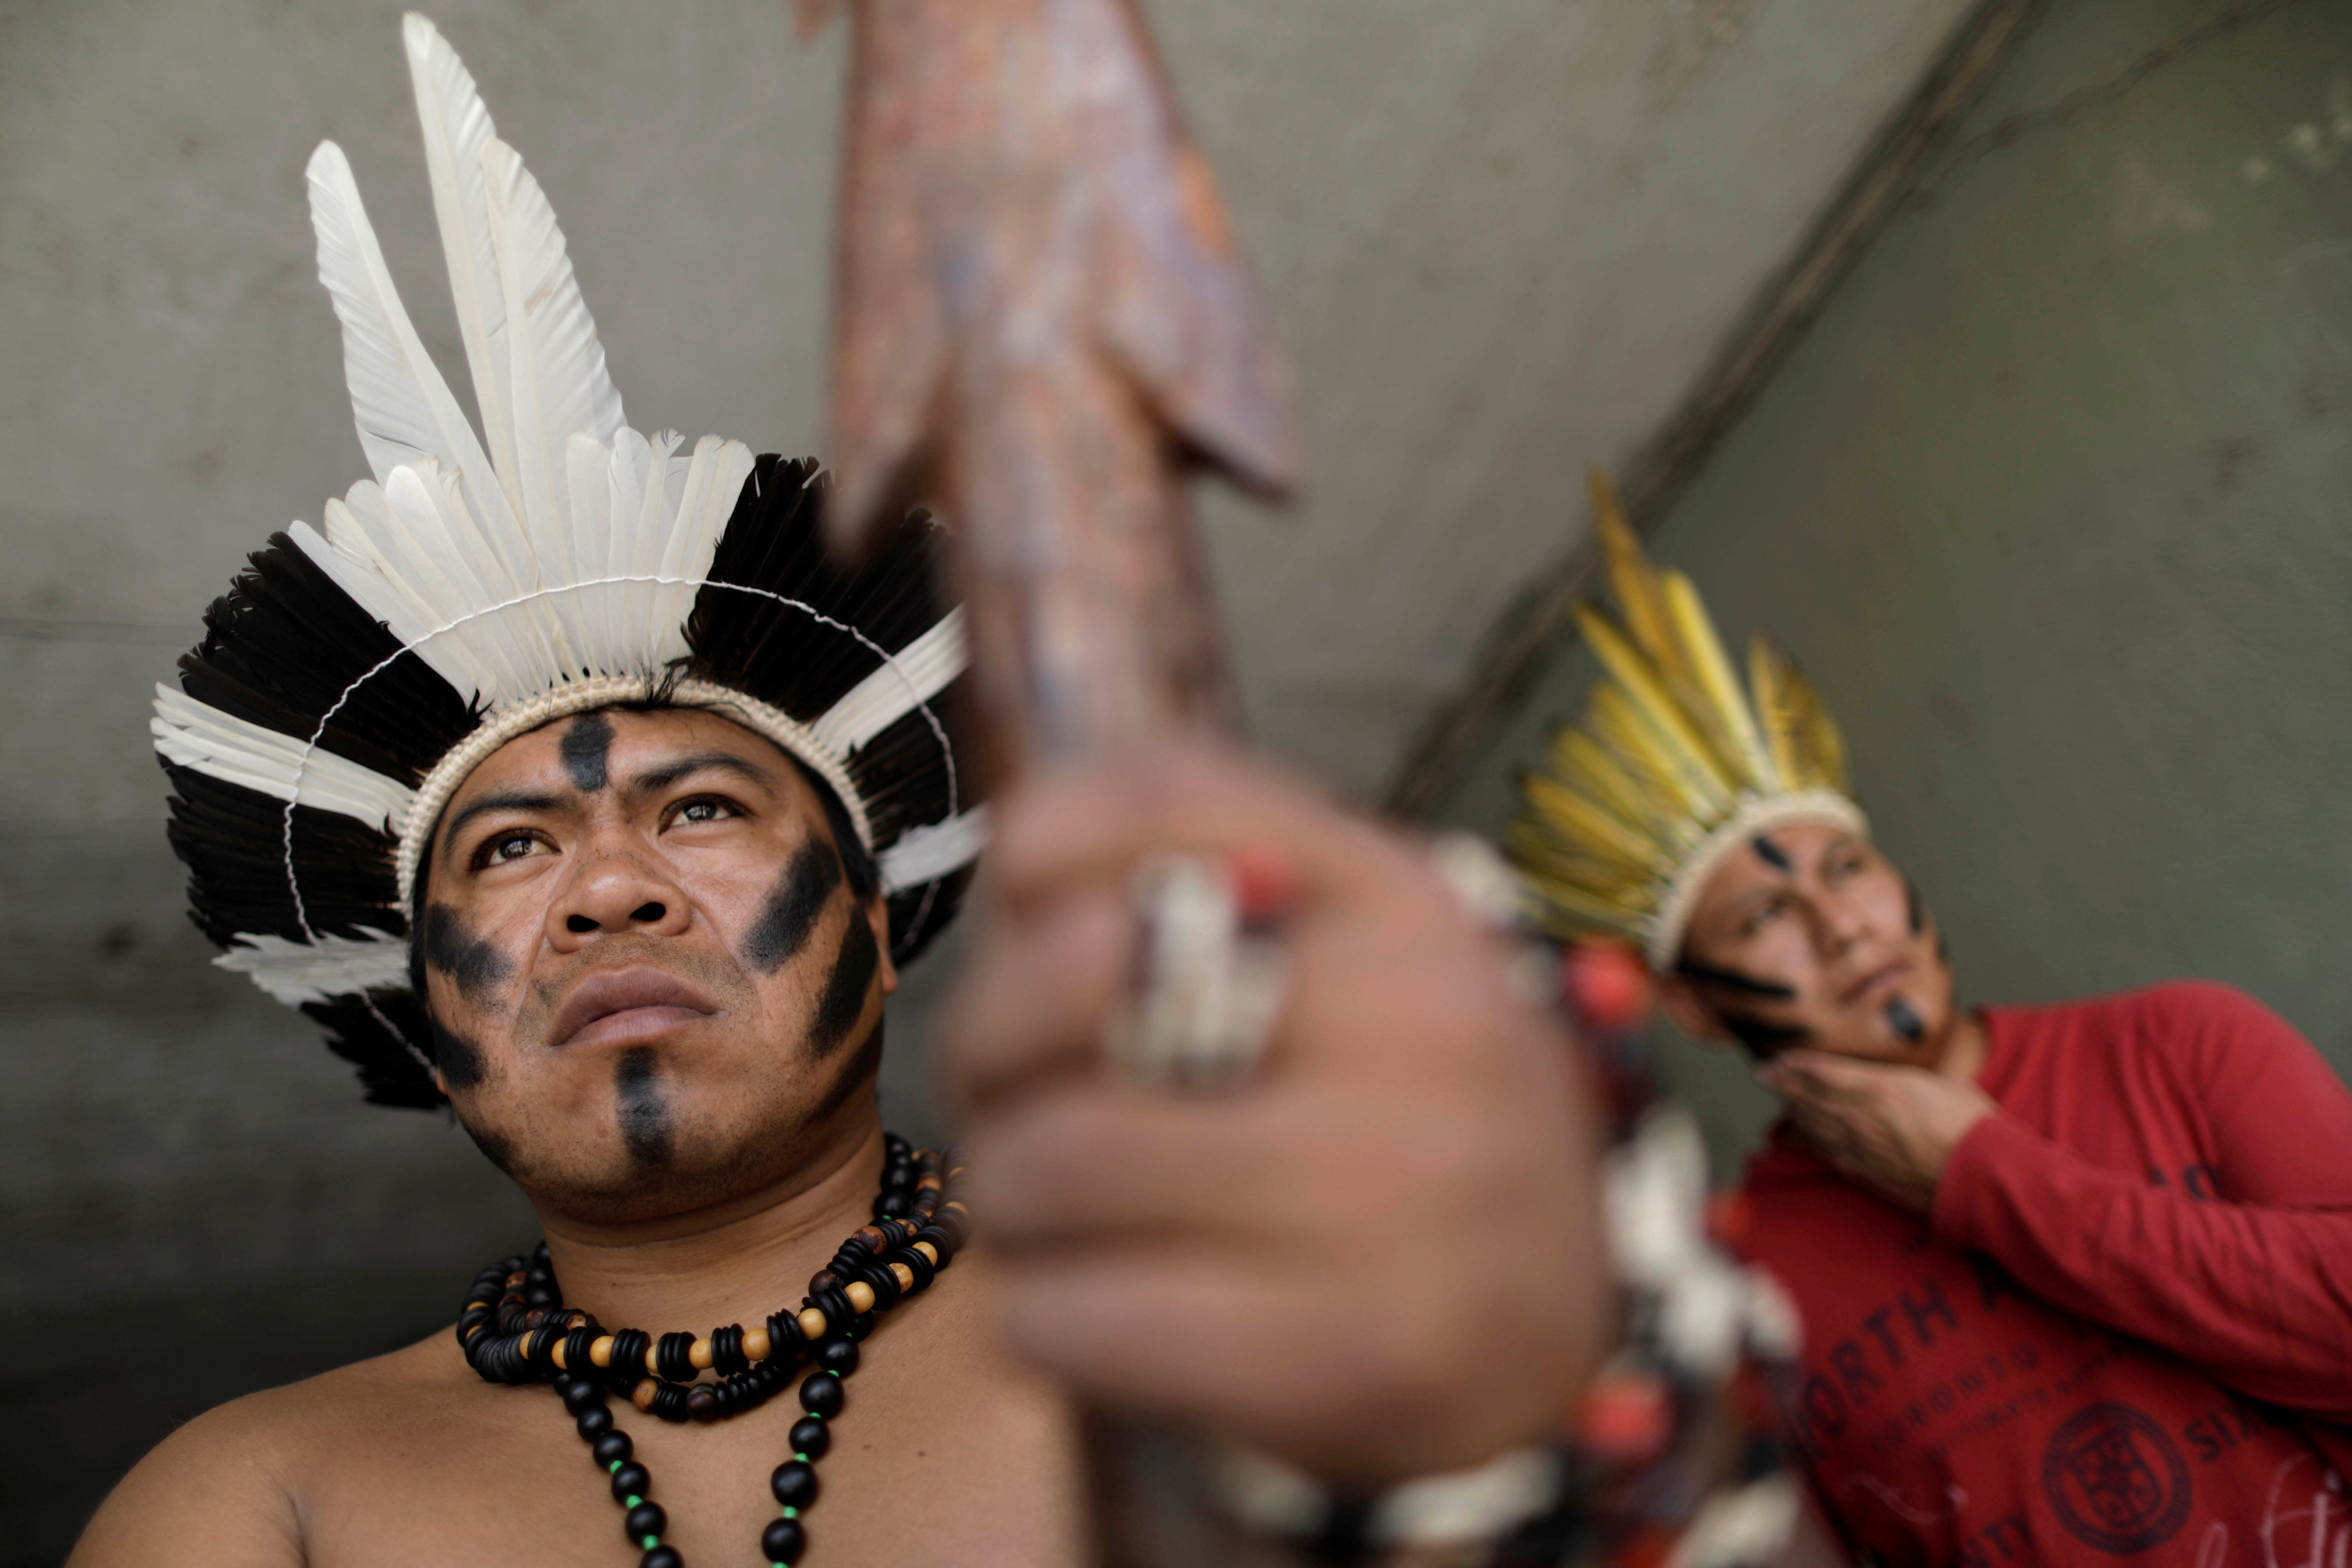 Indigenous people of southern Brazil are seen in Brasilia, Brazil, May 16. Archbishop Salvador Pineiro Garcia-Calderon of Ayacucho, president of the Peruvian bishops' conference, said May 16 that Pope Francis is considering dedicating a meeting of the Synod of Bishops to the concerns of the indigenous people of the Amazon region. (CNS photo/Ueslei Marcelino, Reuters)